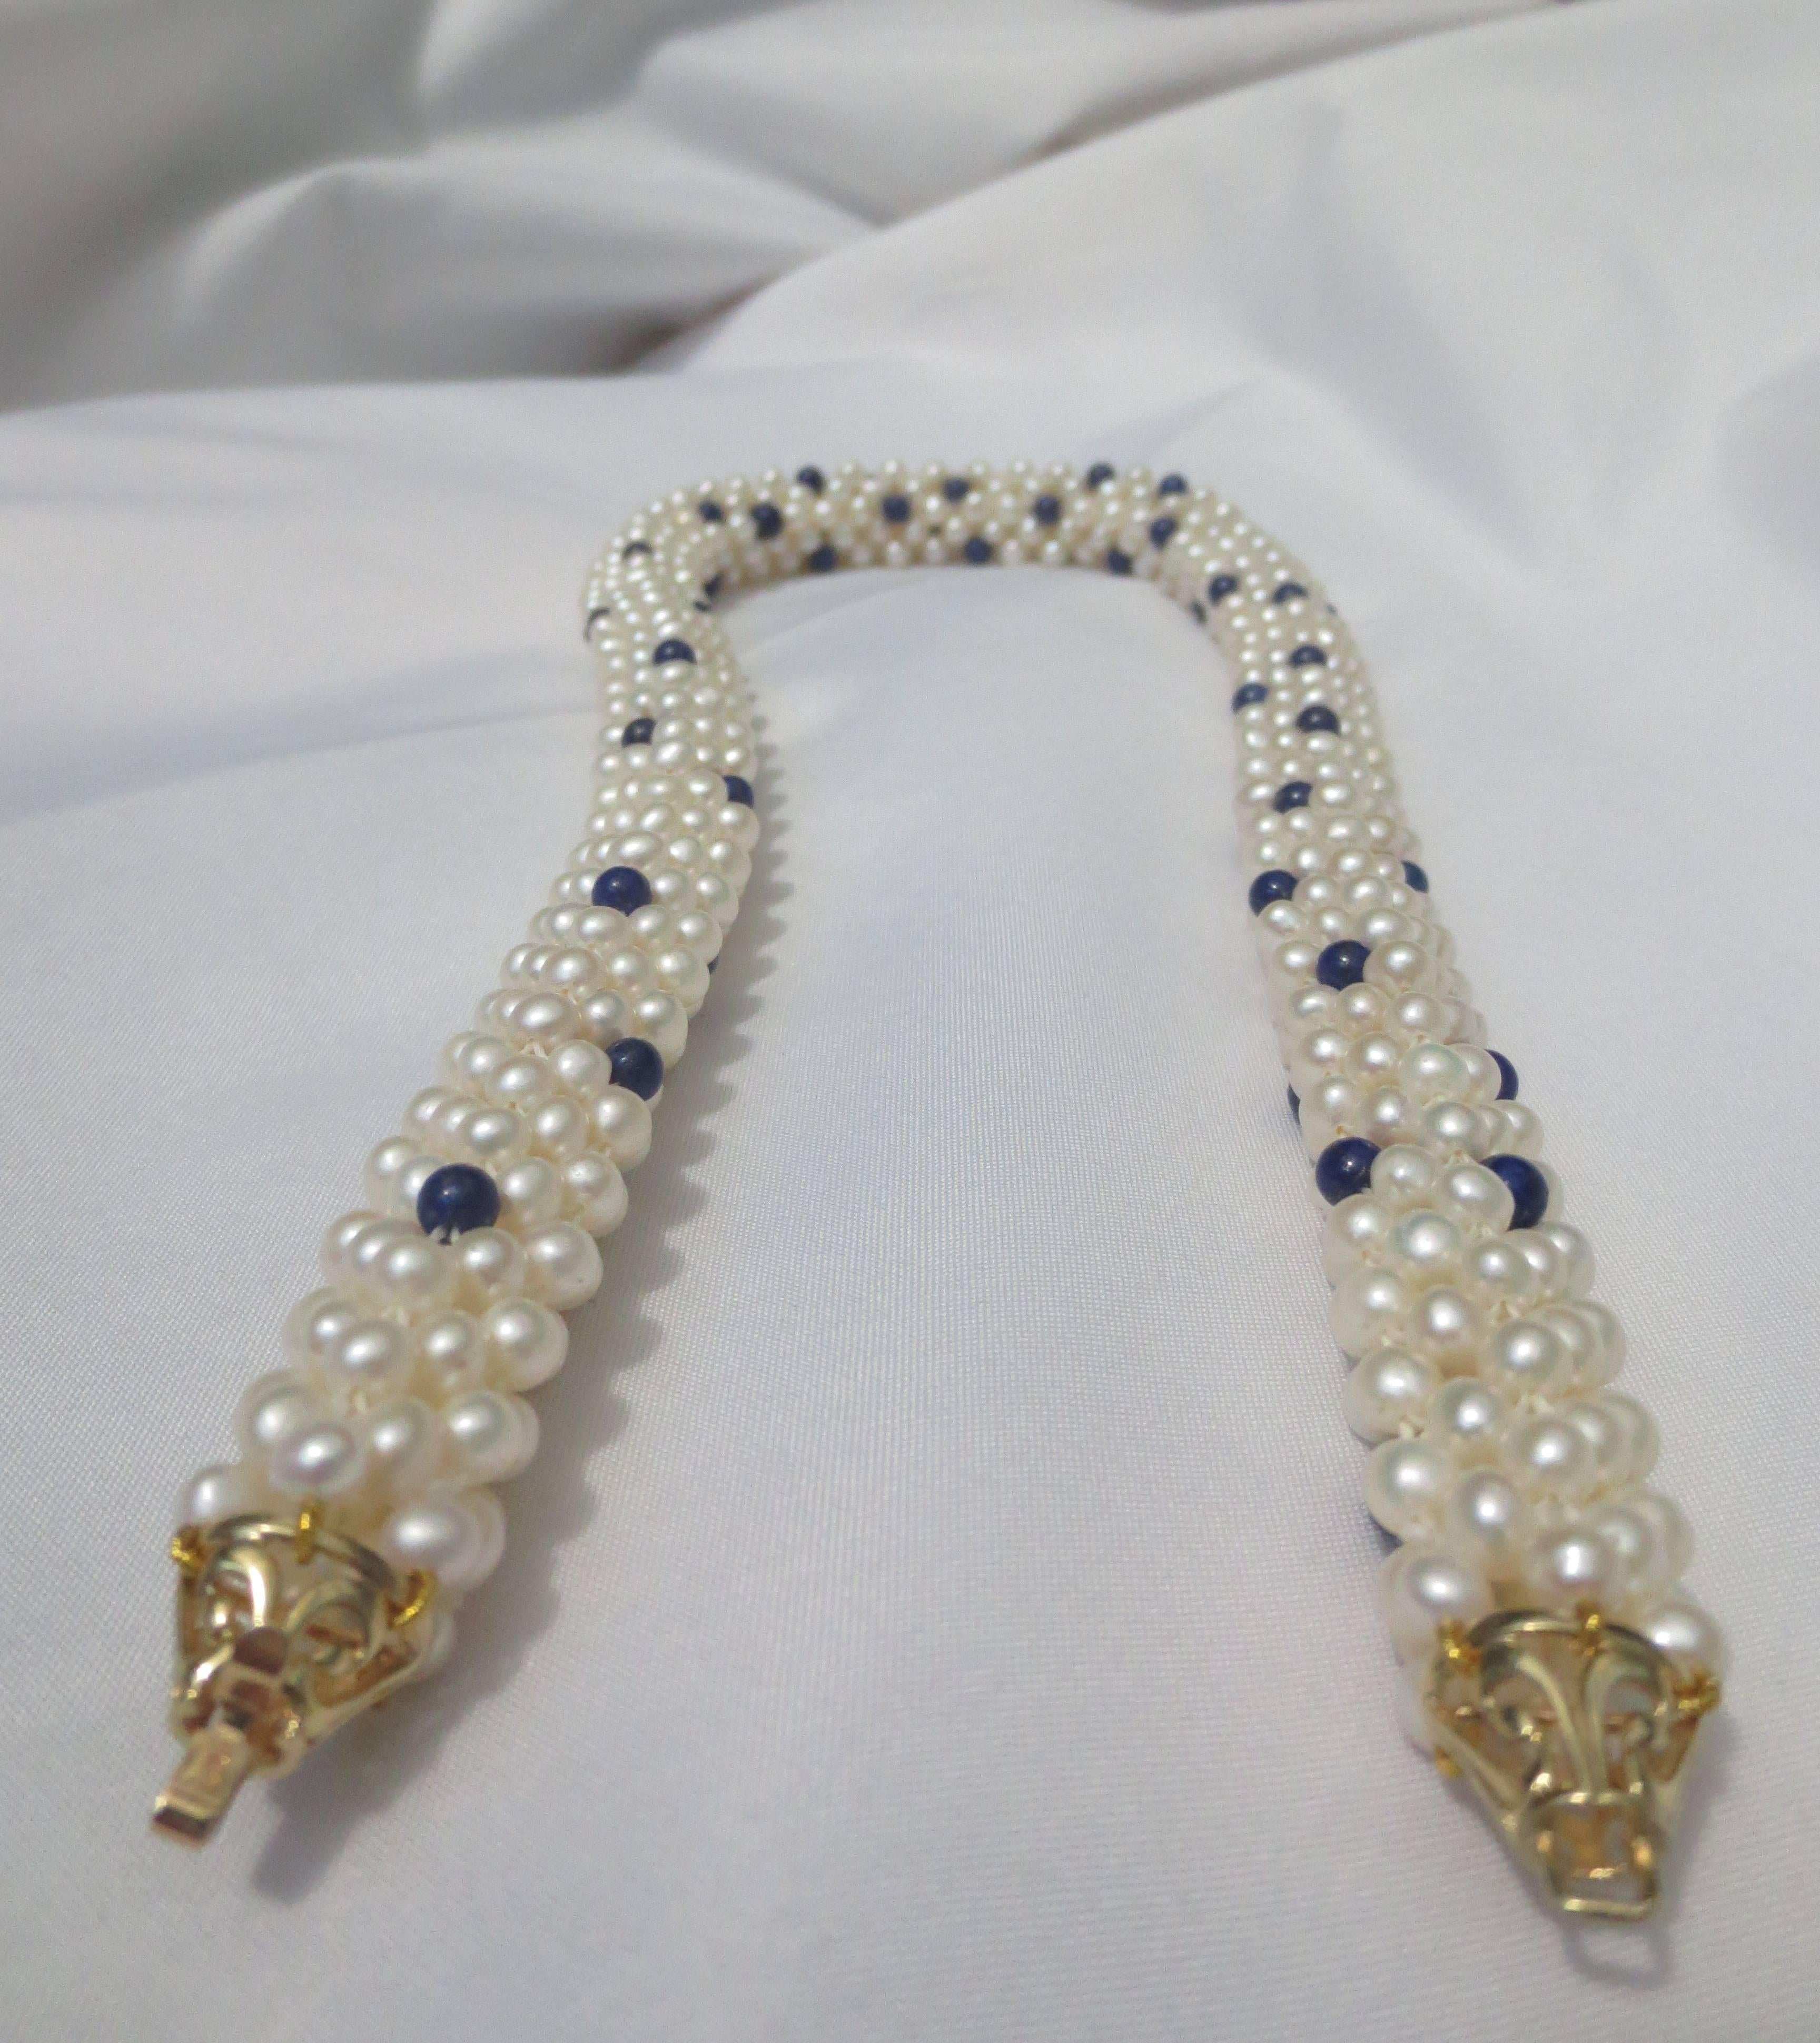 Women's Lapis Lazuli and White Pearl Woven Rope Necklace with 14 k Yellow Gold Clasp